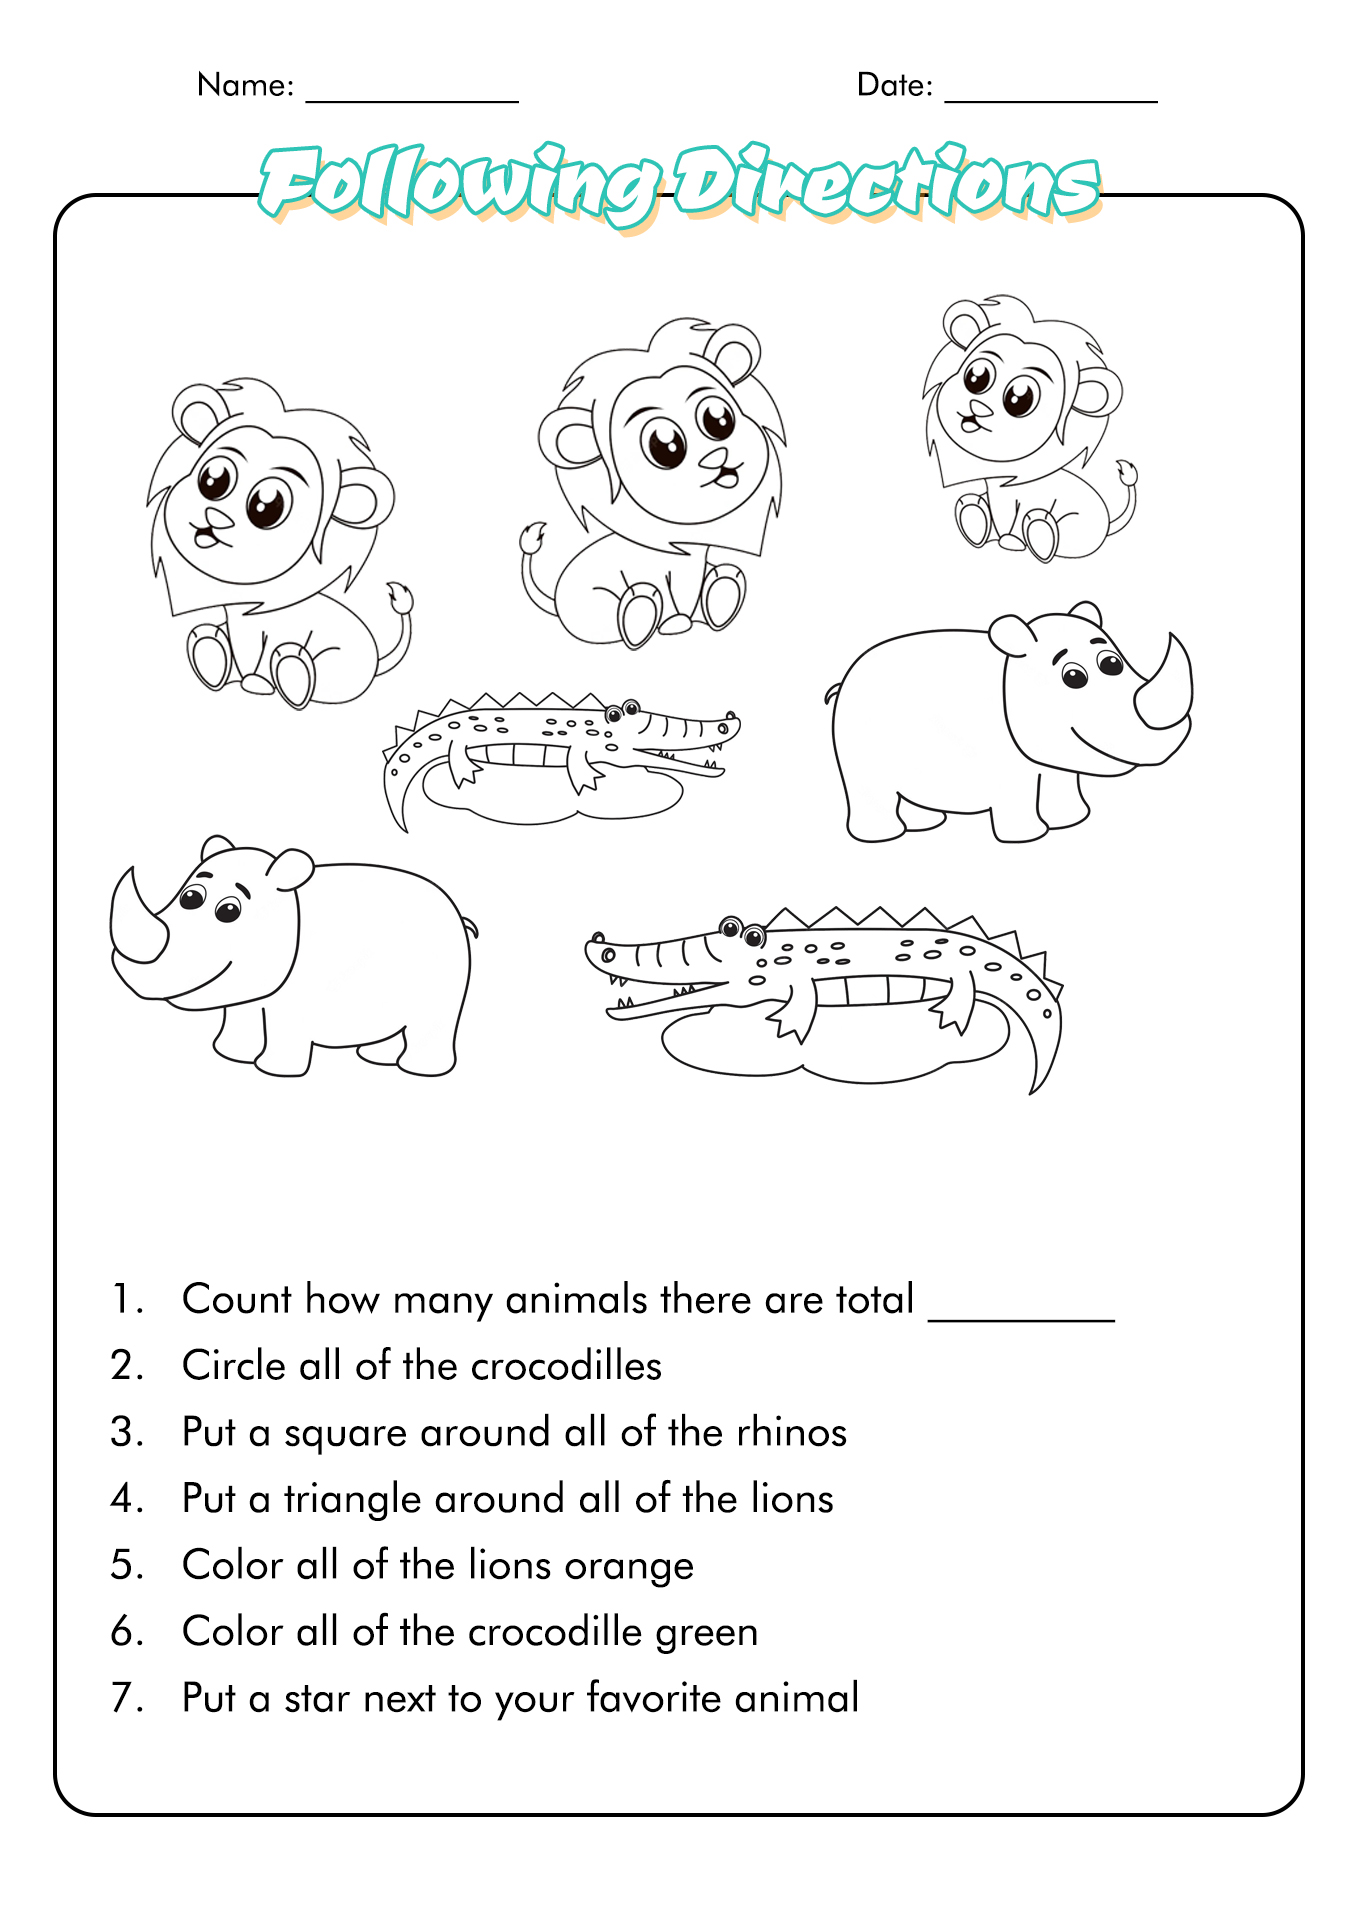 Following Directions Worksheets